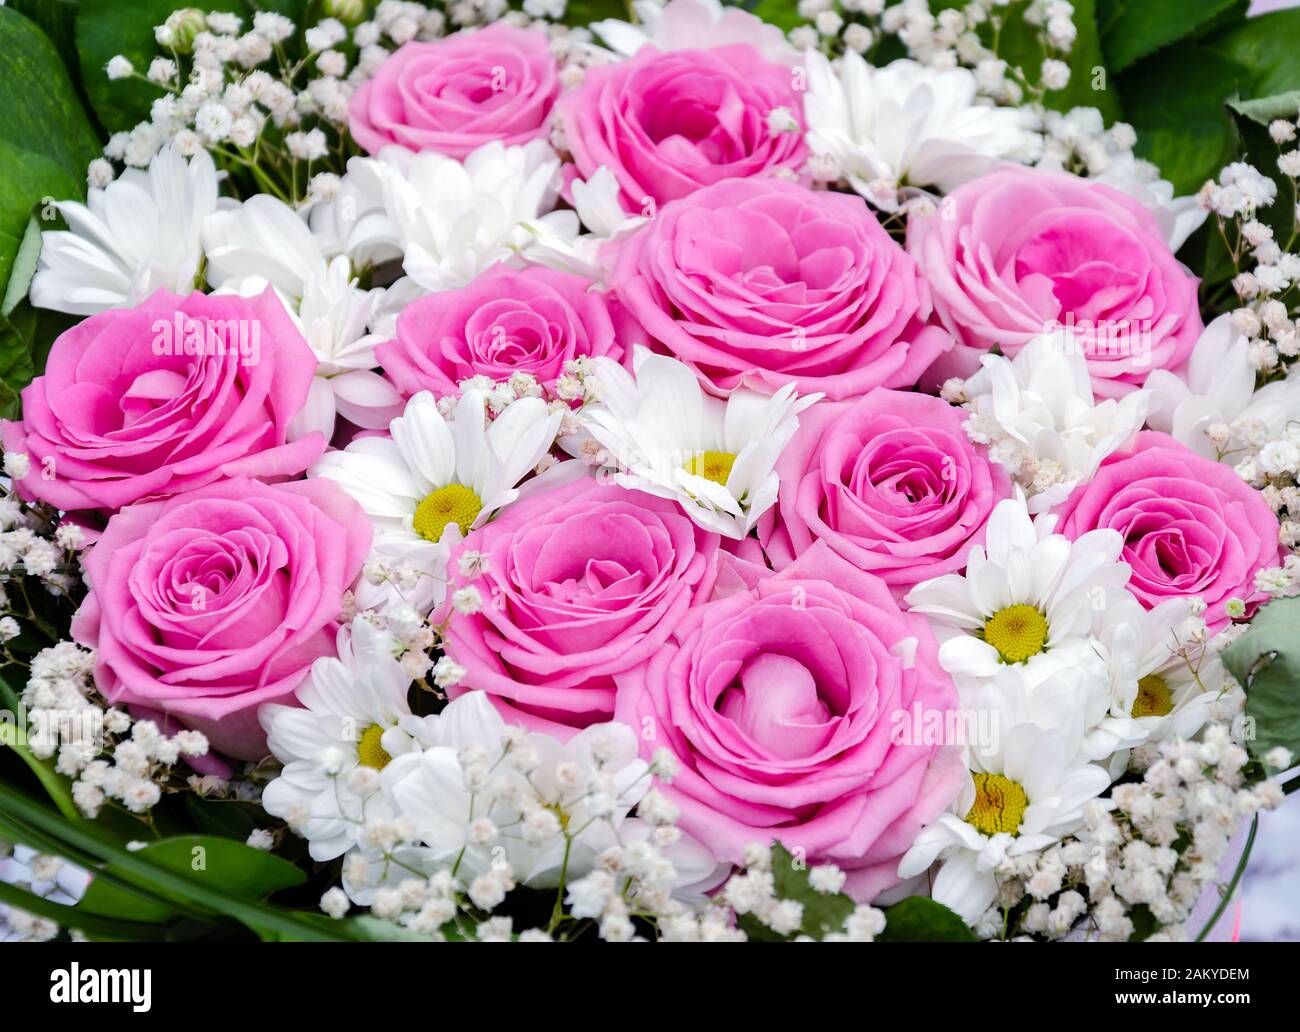 Beautiful Bouquet Of Flowers Images / Wedding bouquets, wild flowers ...